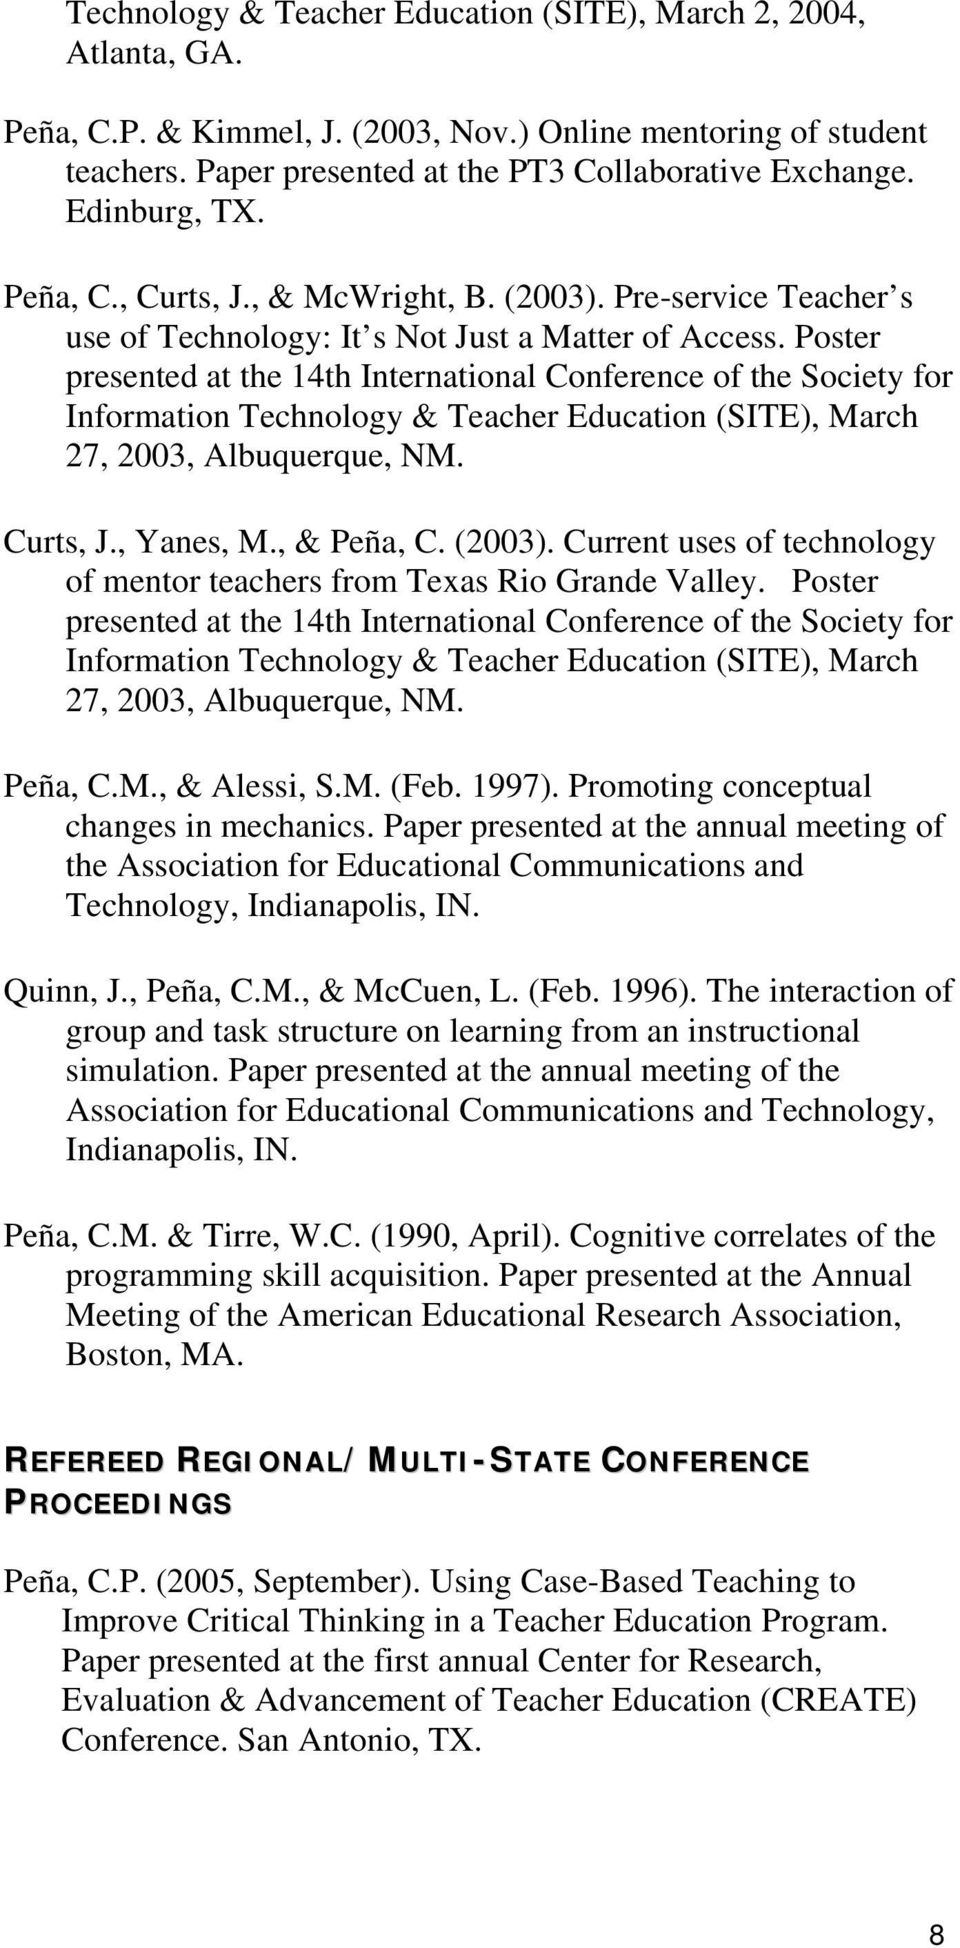 Poster presented at the 14th International Conference of the Society for Information Technology & Teacher Education (SITE), March 27, 2003, Albuquerque, NM. Curts, J., Yanes, M., & Peña, C. (2003).